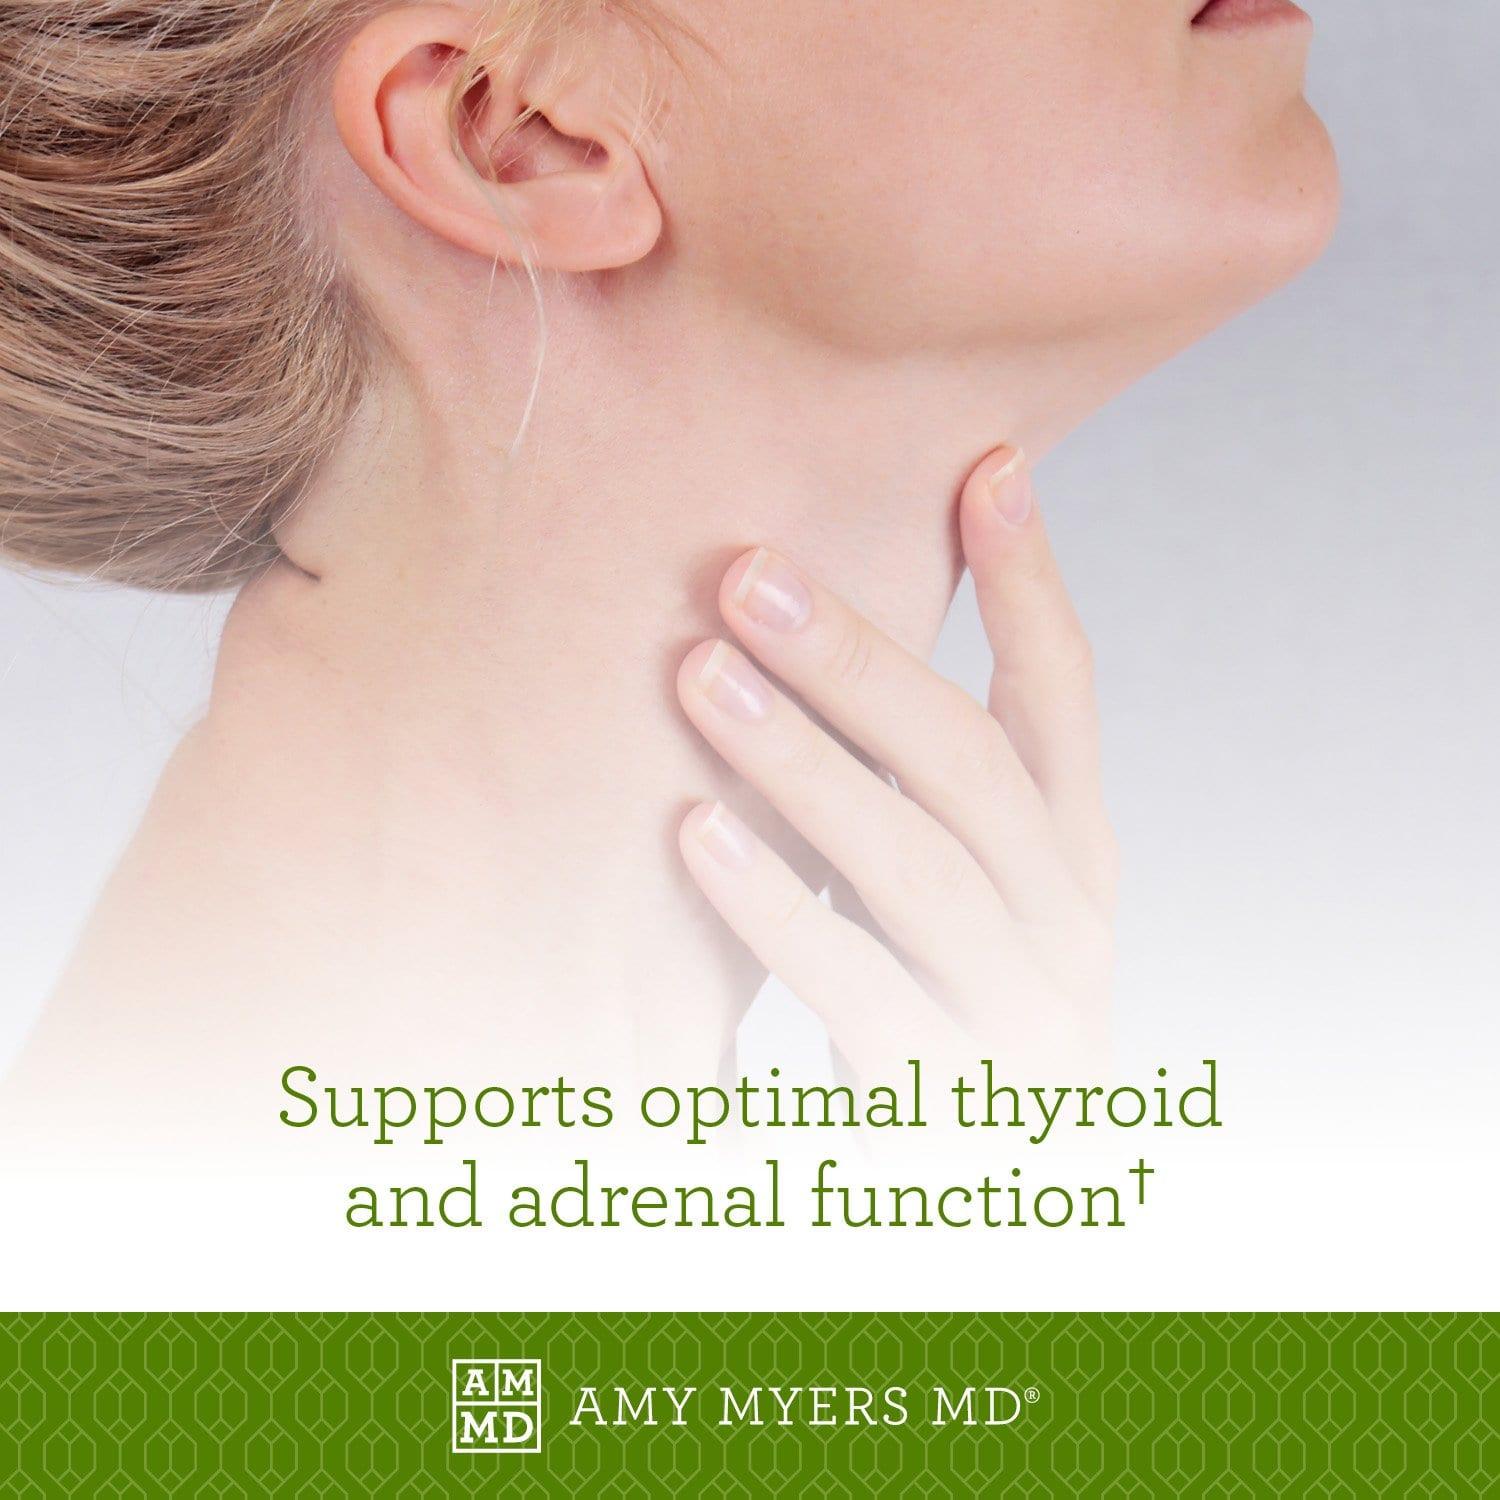 Woman feeling her neck - The Myers Way® Multivitamin supports optimal thyroid and adrenal function - Amy Myers MD®